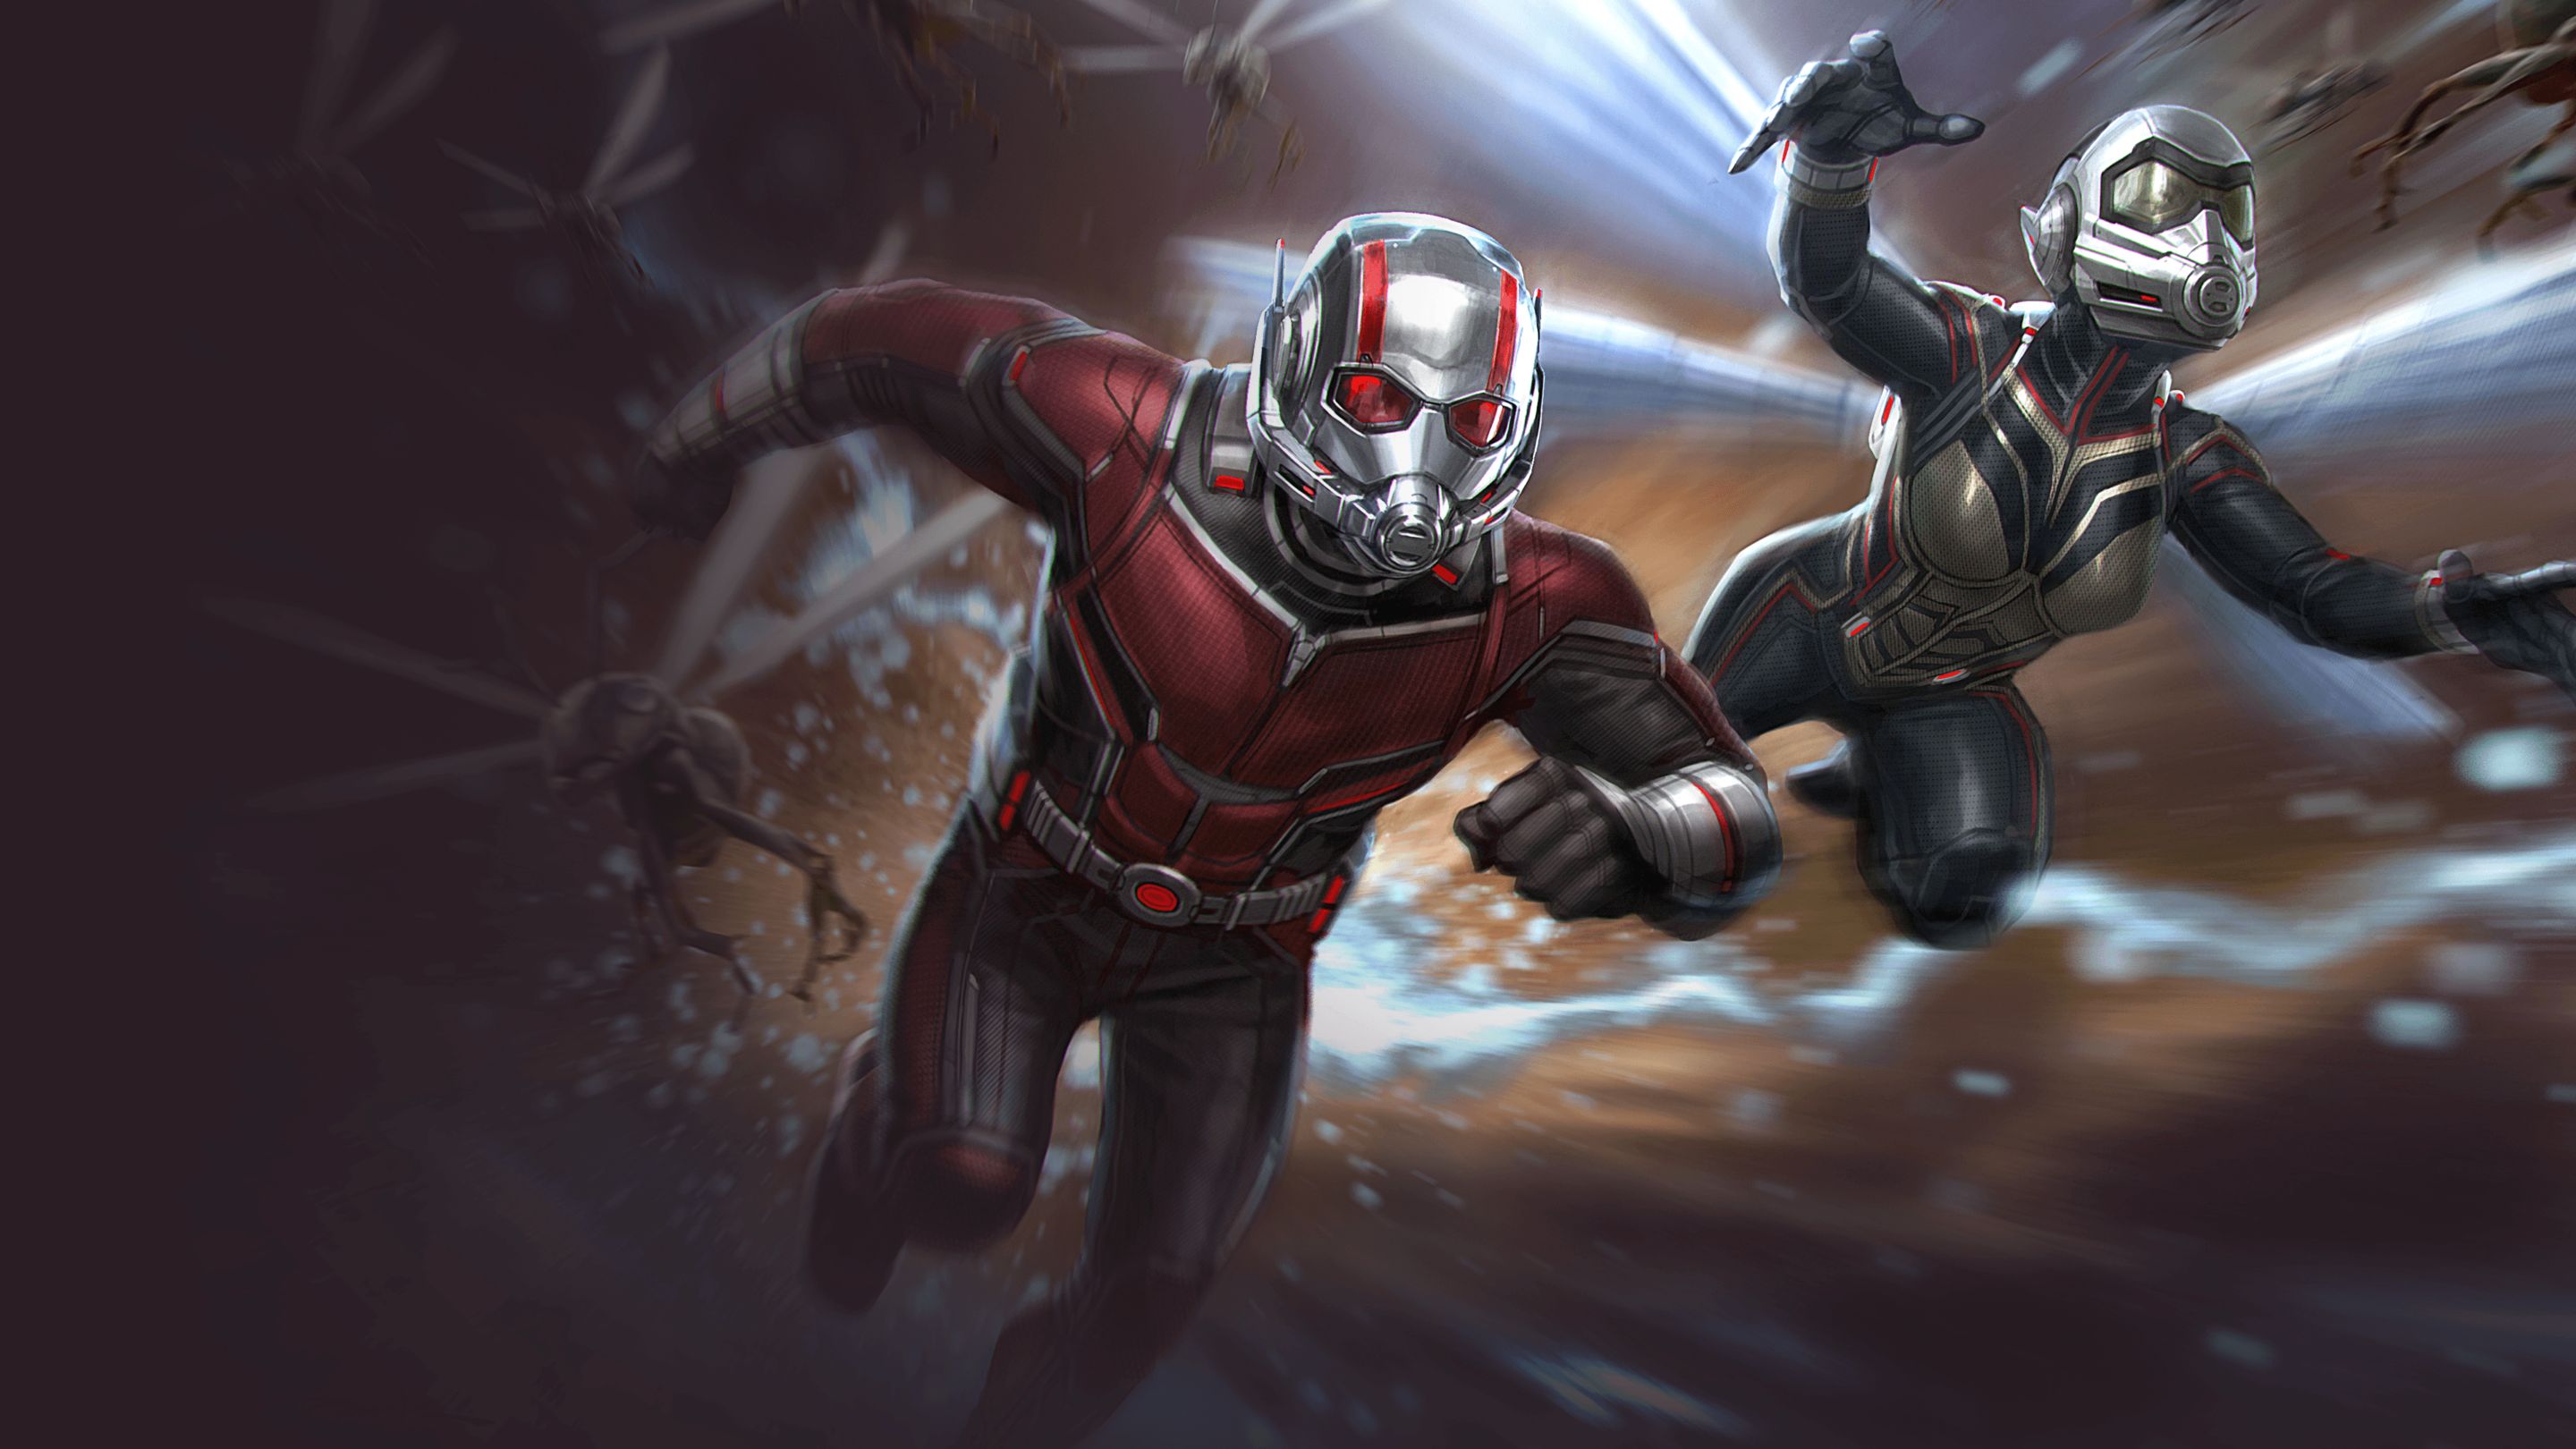 Watch Ant-Man and the Wasp